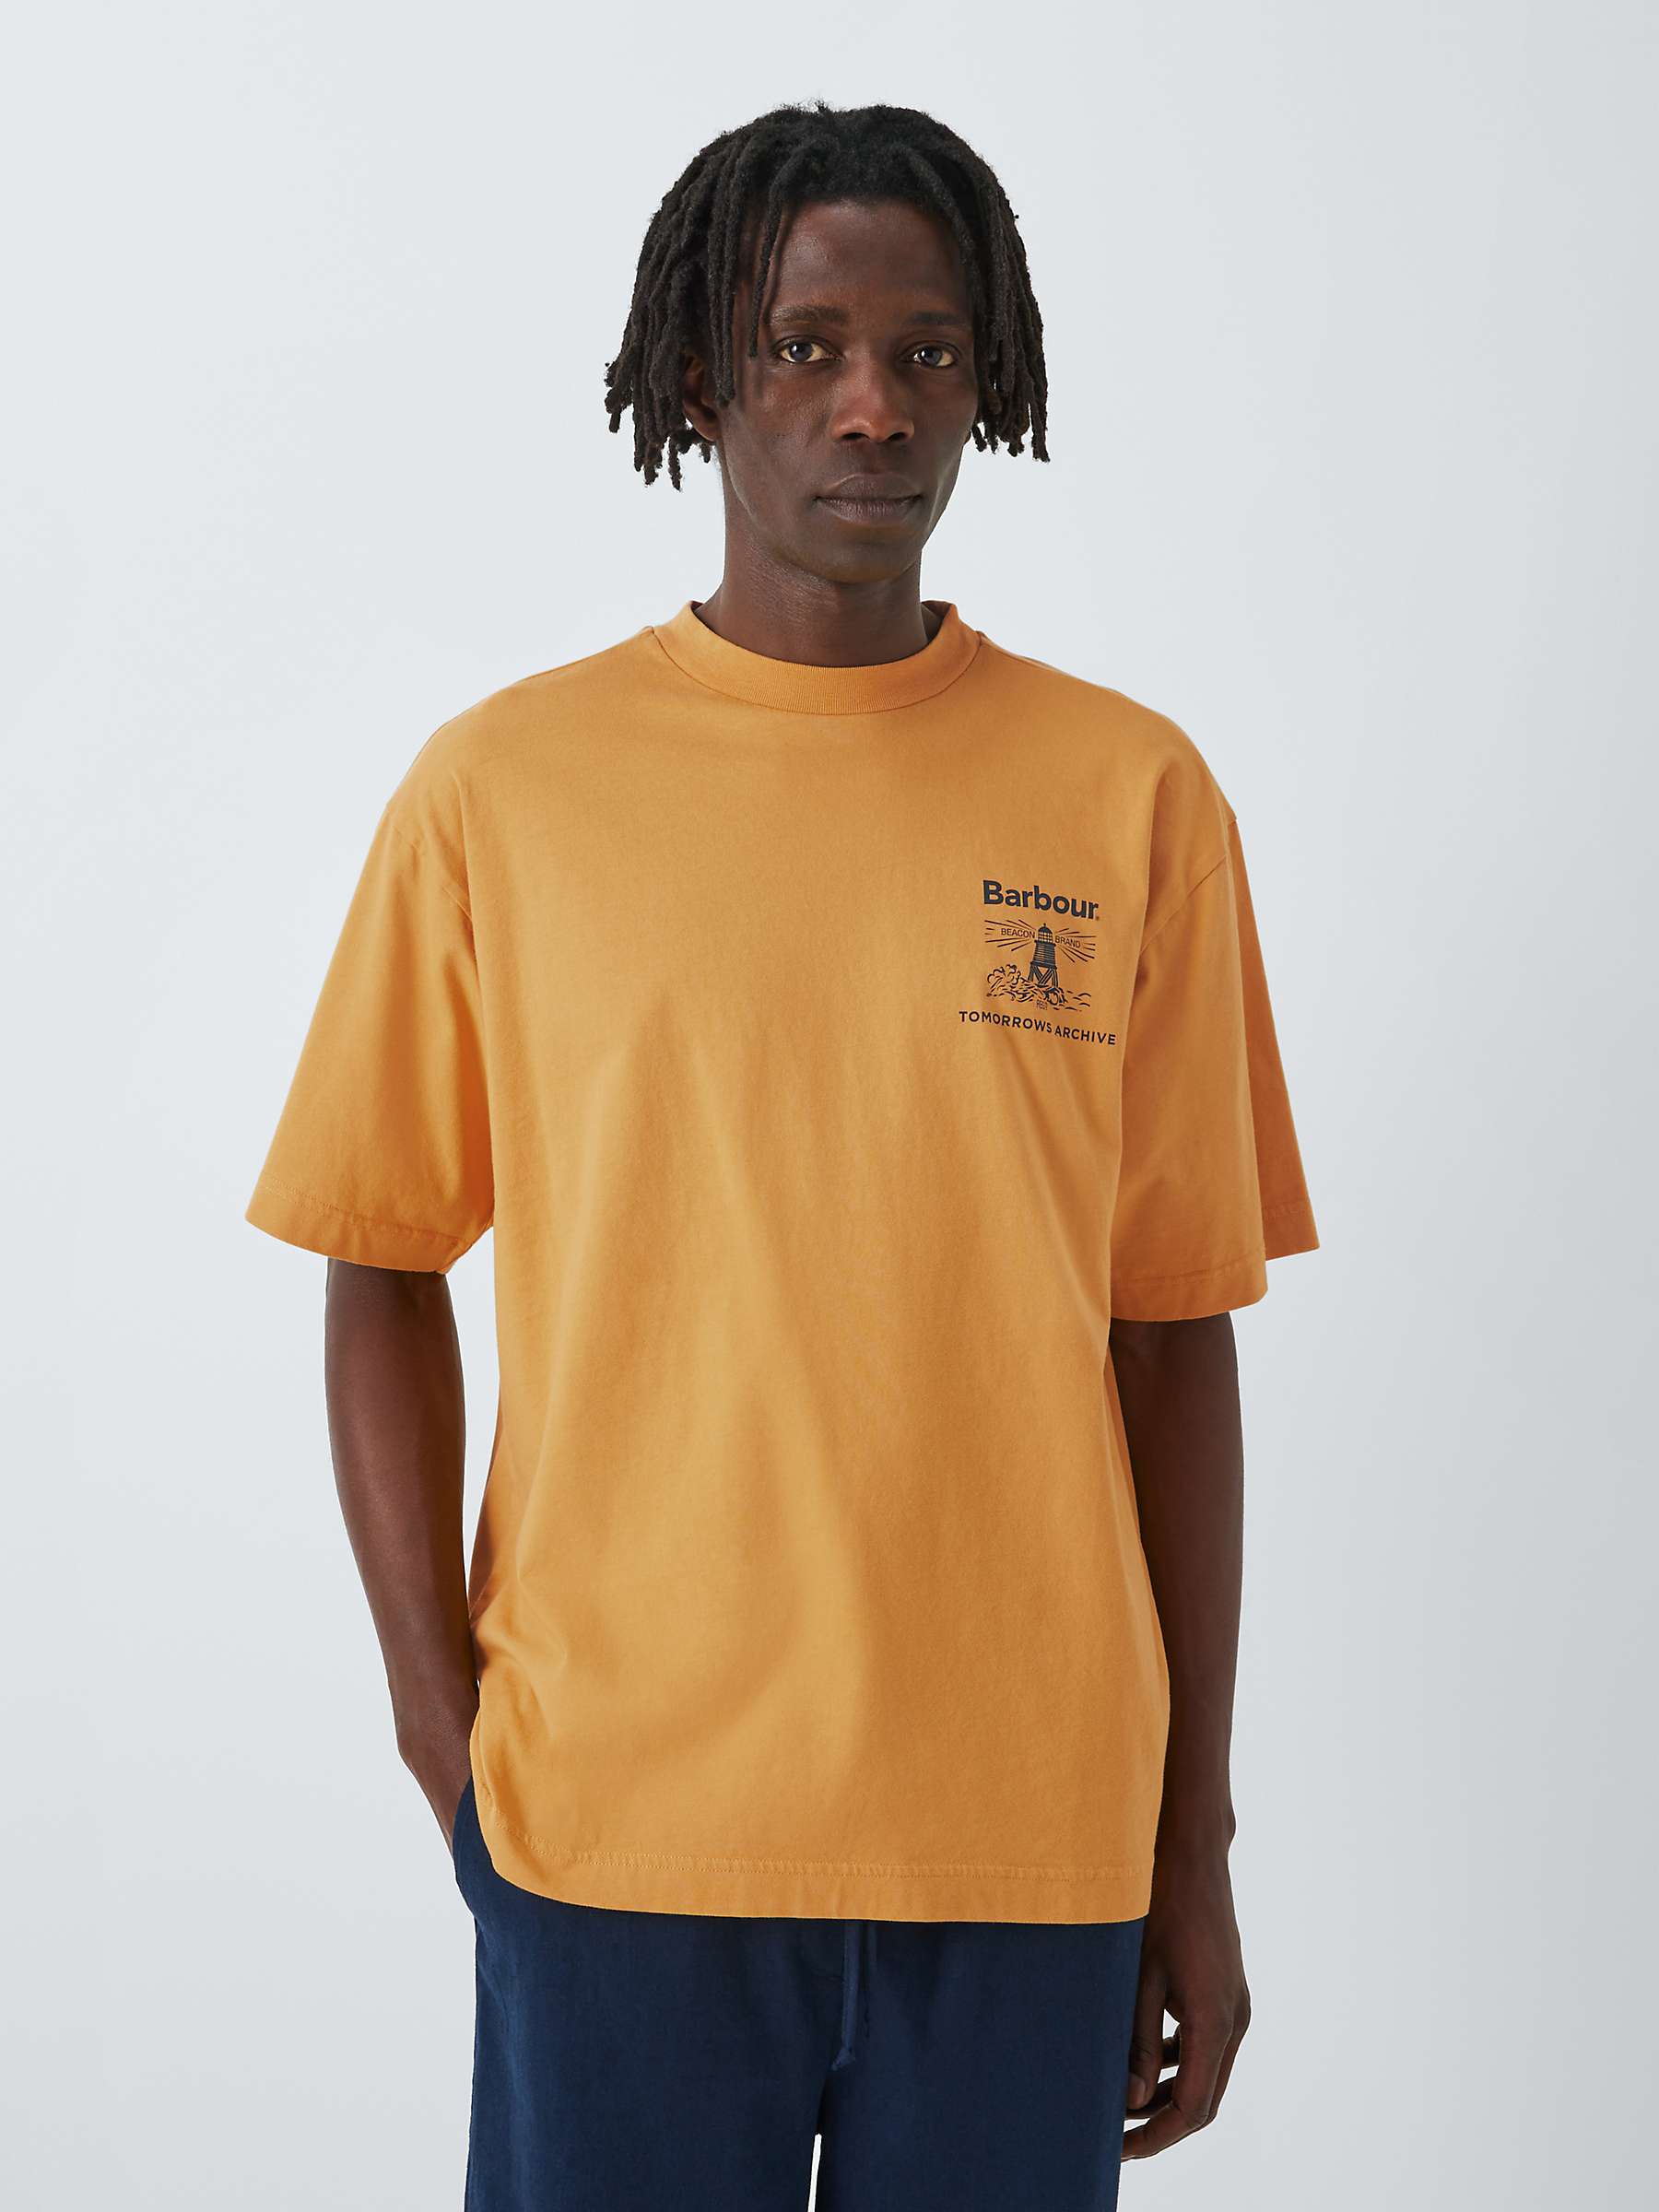 Buy Barbour Tomorrow's Archive Arbour Short Sleeve T-Shirt, Honey Gold Online at johnlewis.com